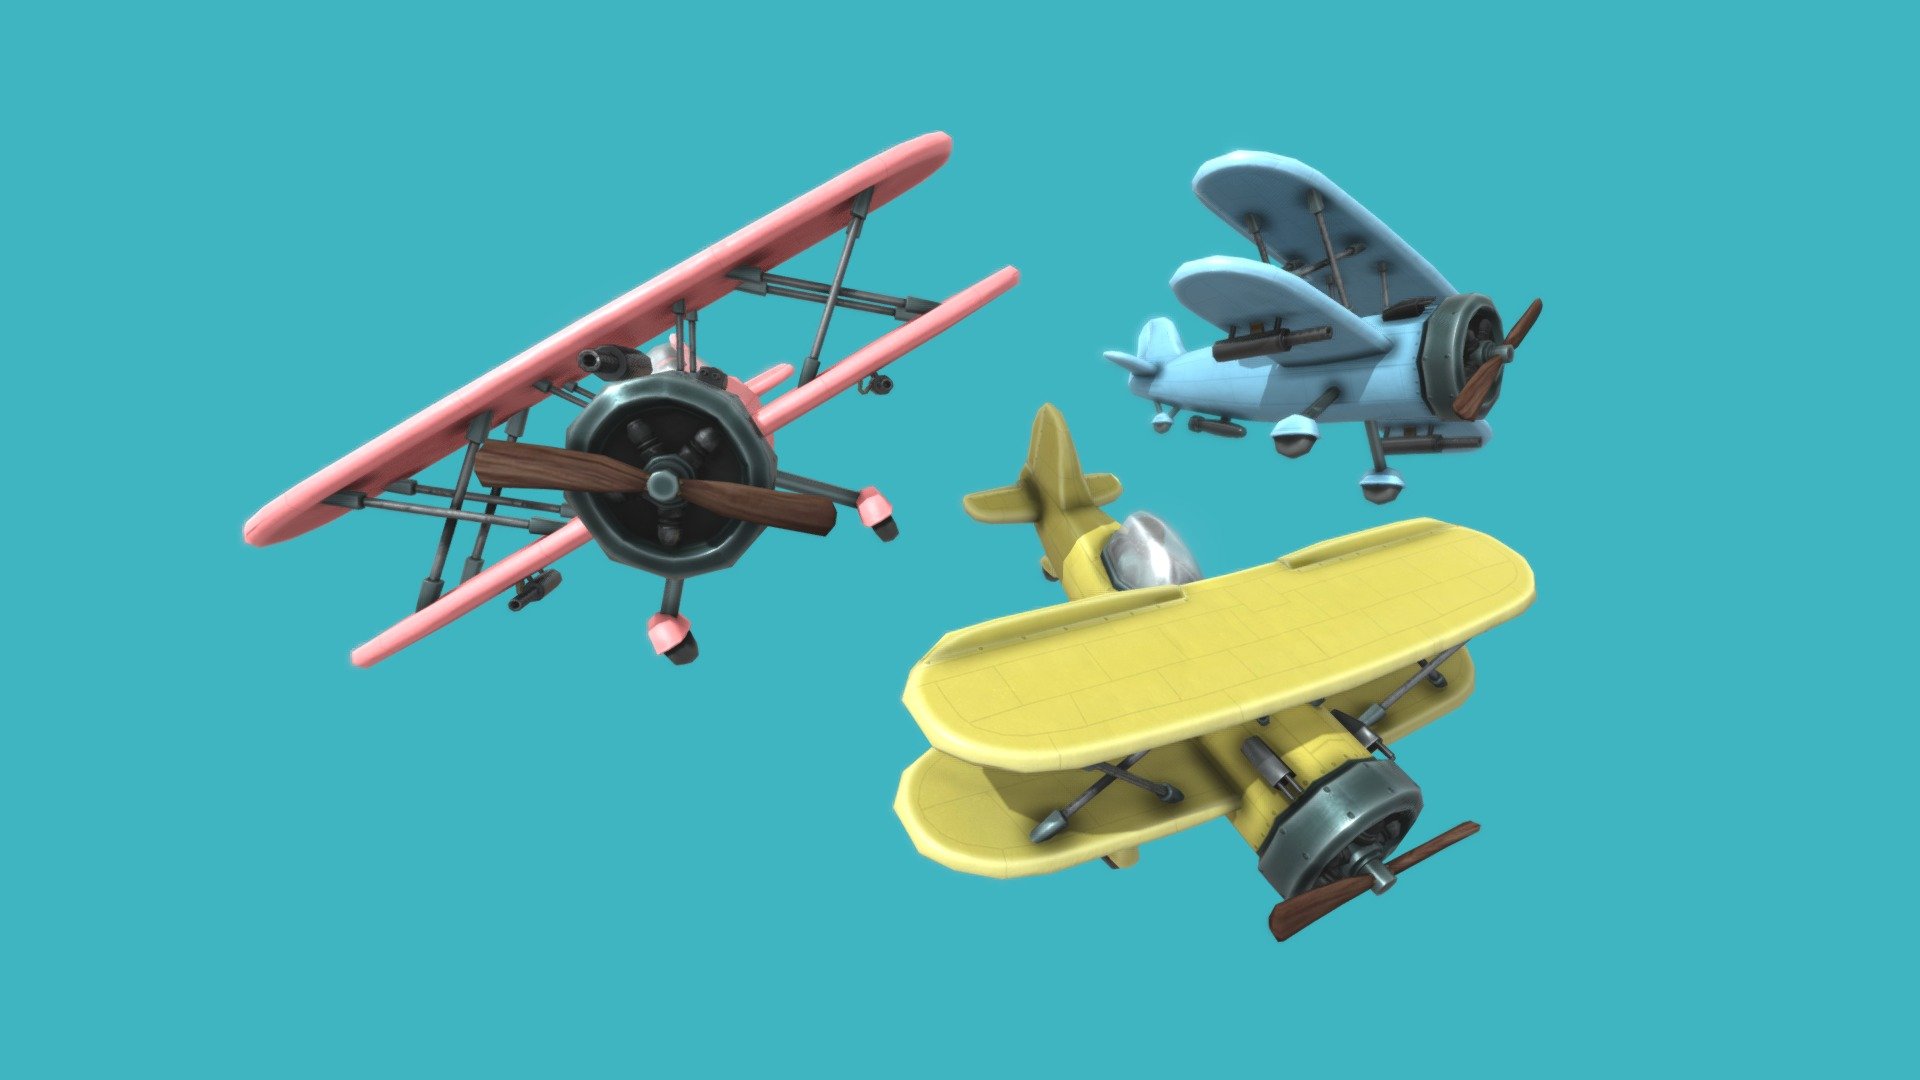 hey, i made some Mobile Stylized Cartoon Airplane Asset . kind a nice for your game or scene. 2048px texture Metallic Roughness. Also i have free stuff for download please cek my page, and follow for update upload.

Package:
- 14 texture (with 2 additional texture + editable PSD for base color)
- 3 Guns, 2 Bomb and 1 basic bullet.
- Base (airplane) with each flap.

aaaaaand, i post several model progress on my instagram @ferozes fell free to follow ;)
Play my mobile game https://bit.ly/2FRlptH on googleplay.... ;)

Will come back with more free models. i just want to say thank you for support me.

thanks, have nice dev!… - Mobile Stylized Cartoon Airplane Asset - Buy Royalty Free 3D model by ferofluid 3d model